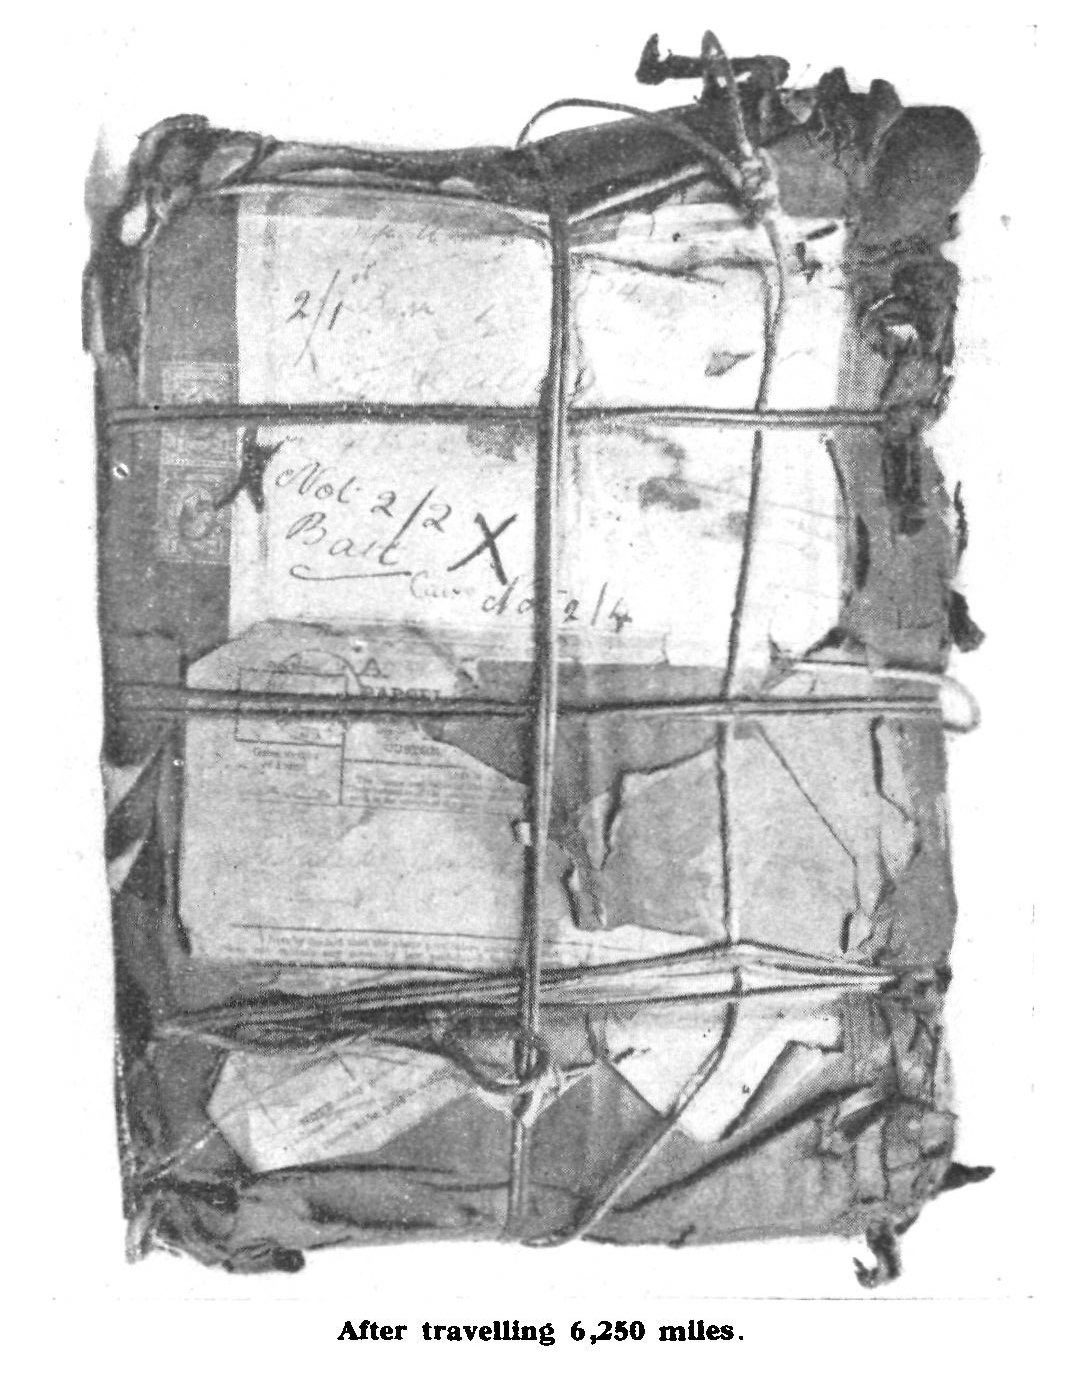 Photograph of a Poly Parcel after travelling 6,250 miles, from the Polytechnic Magazine, 1915